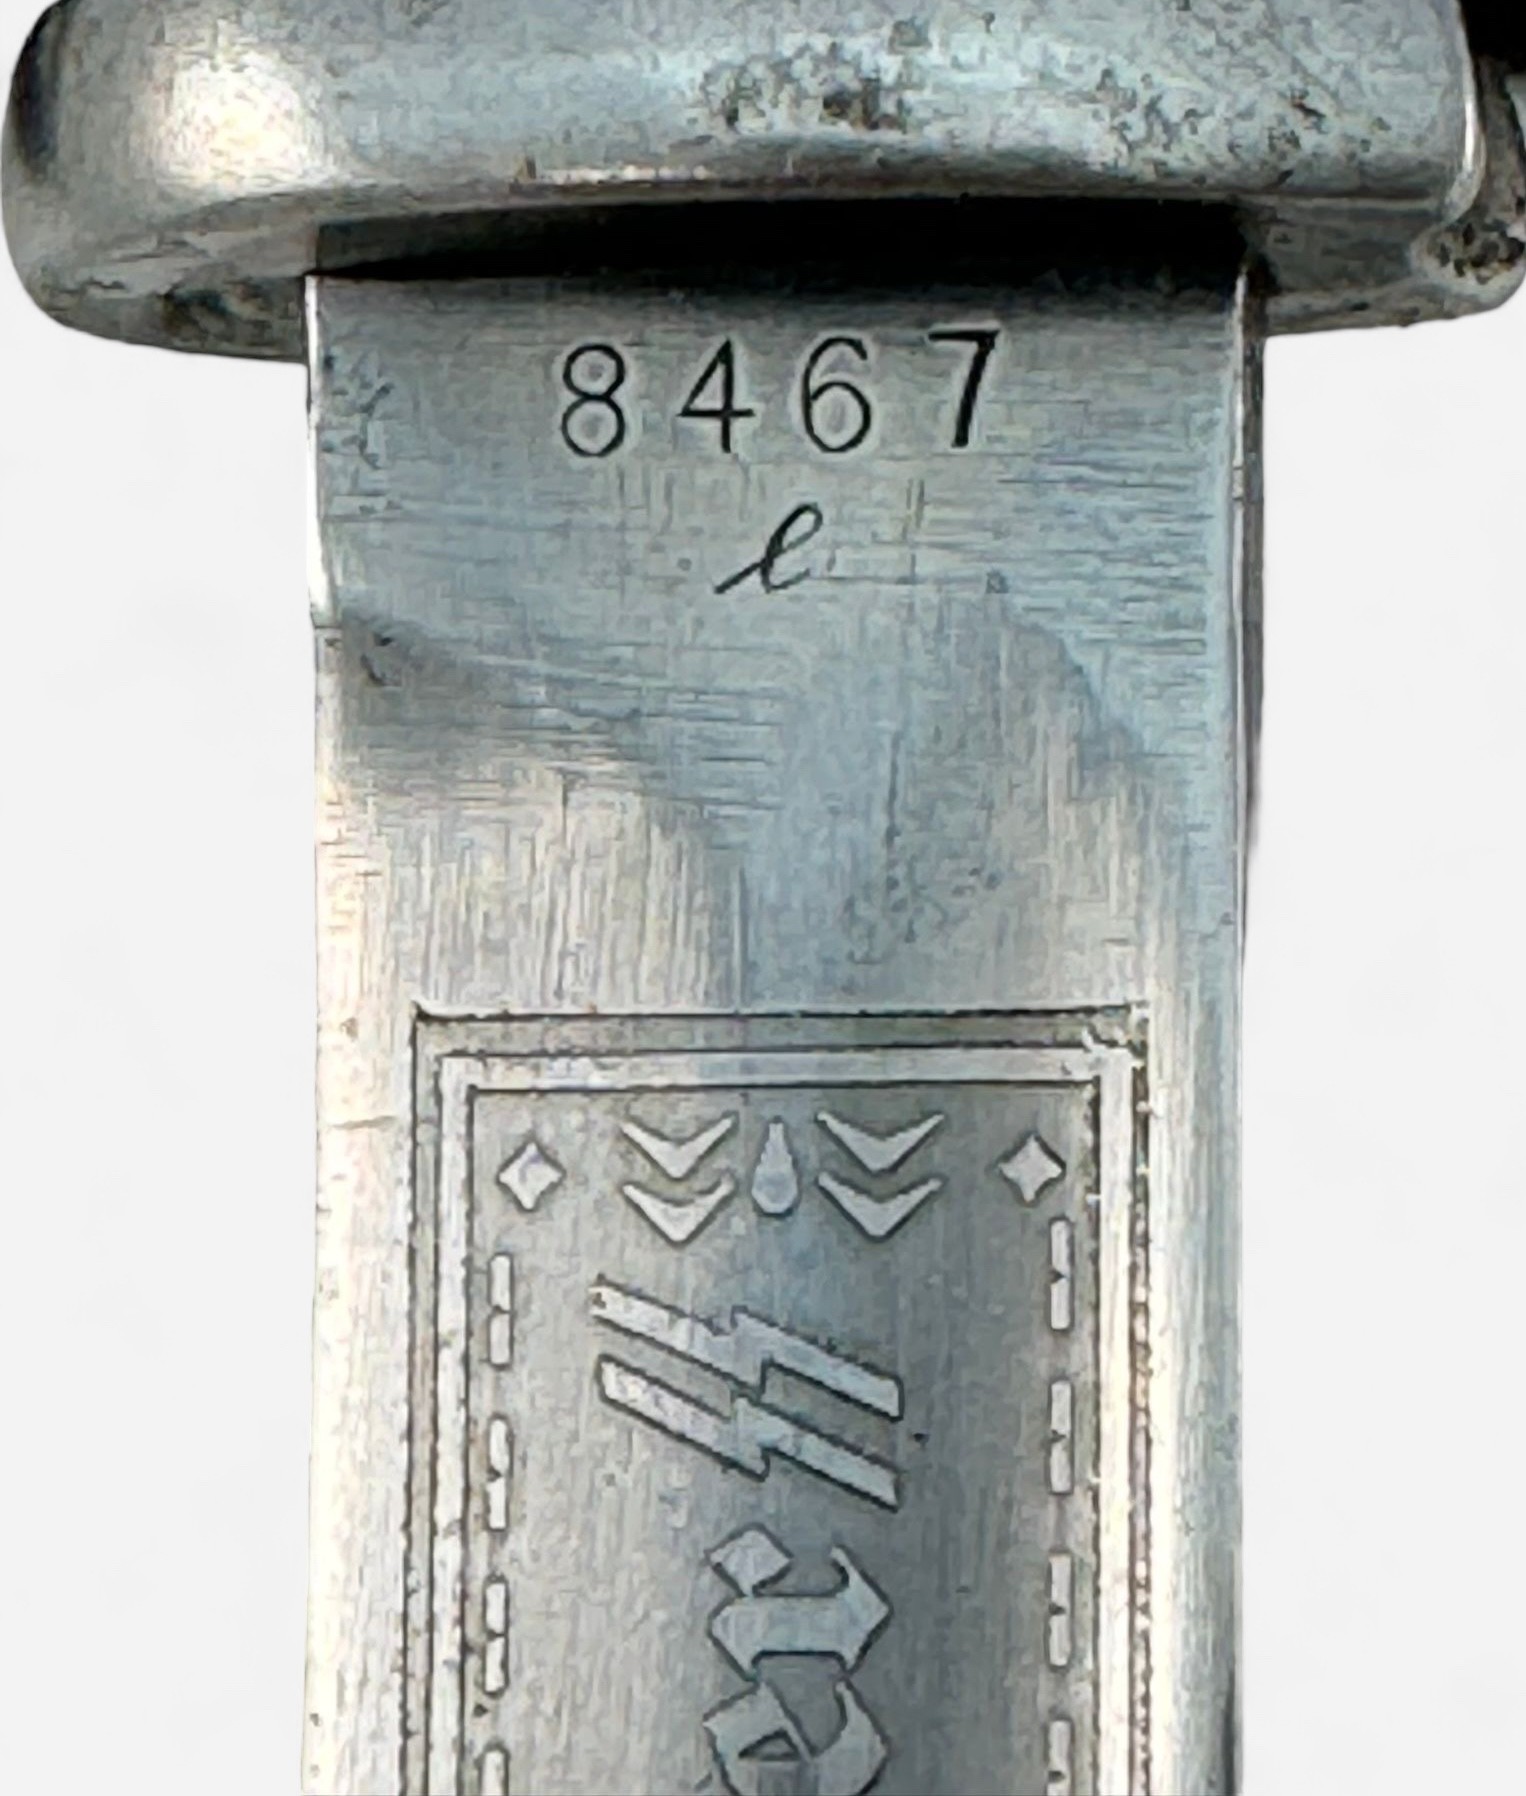 A WWII German Waffen SS bayonet, 25cm fullered blade, etched 'meine ehre heißt treue' (my honour - Image 3 of 4